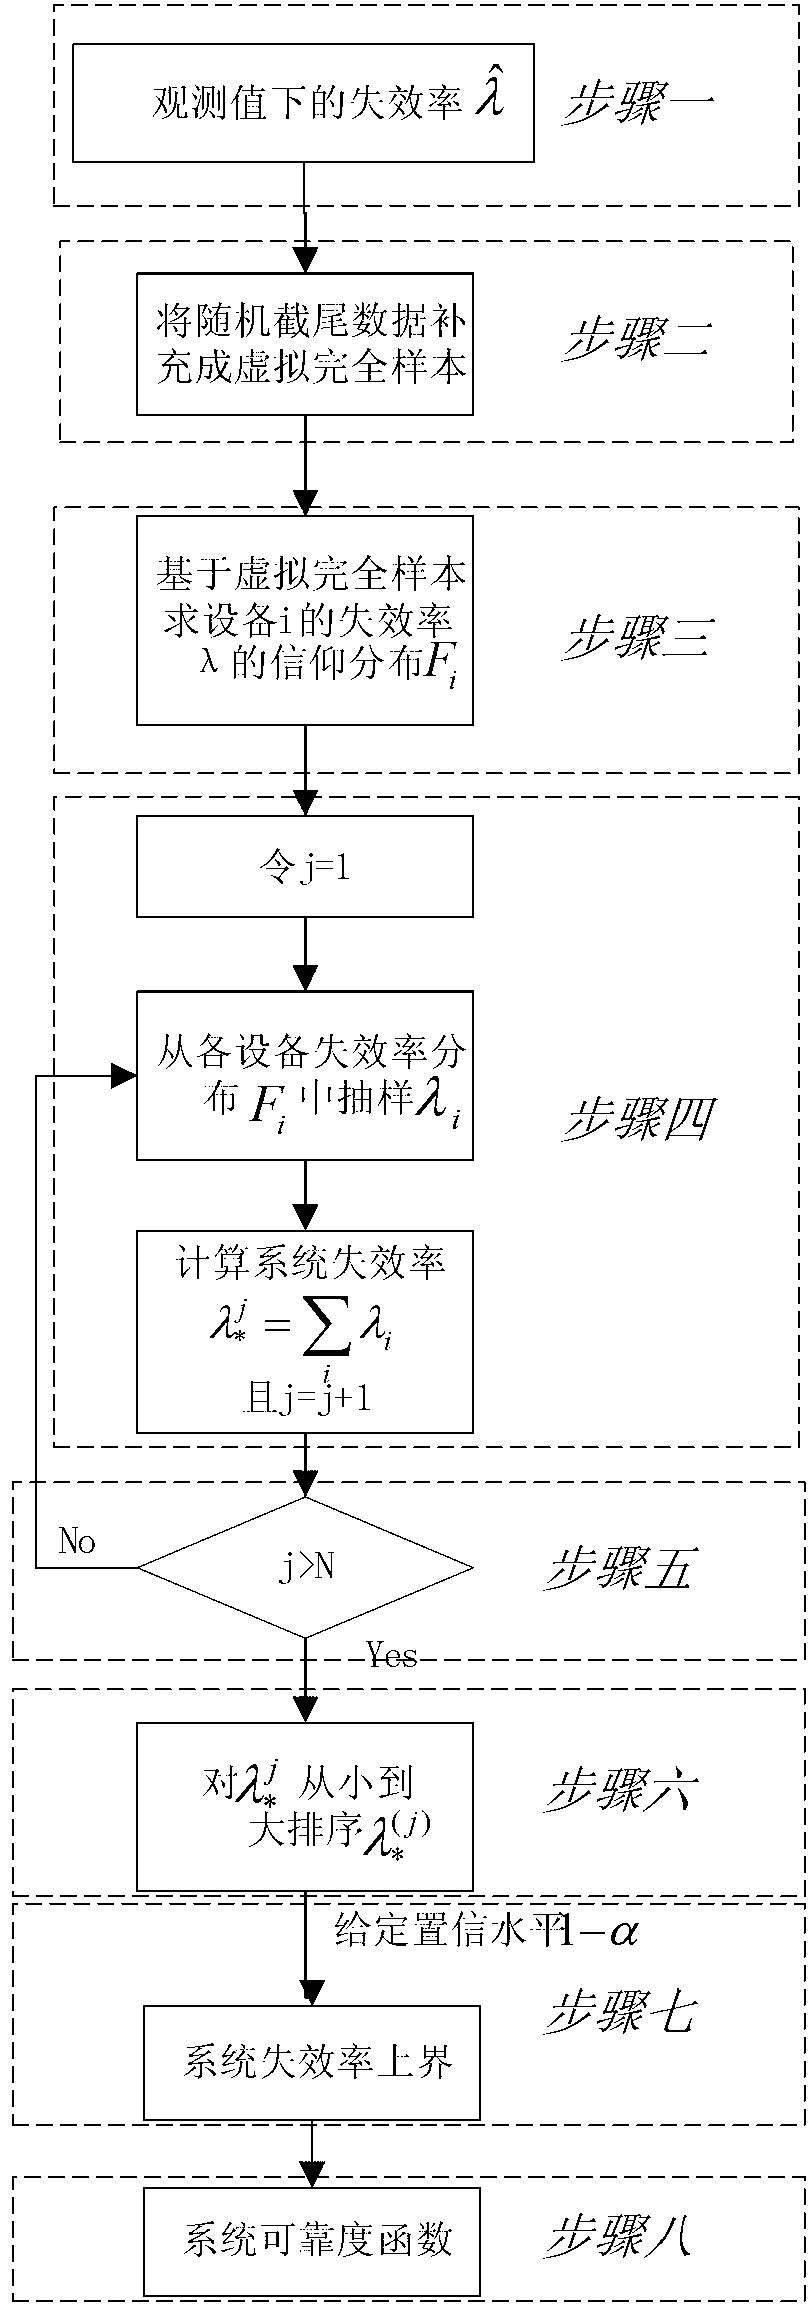 Estimation method of series system reliability degree lower confidence limit of exponential distribution